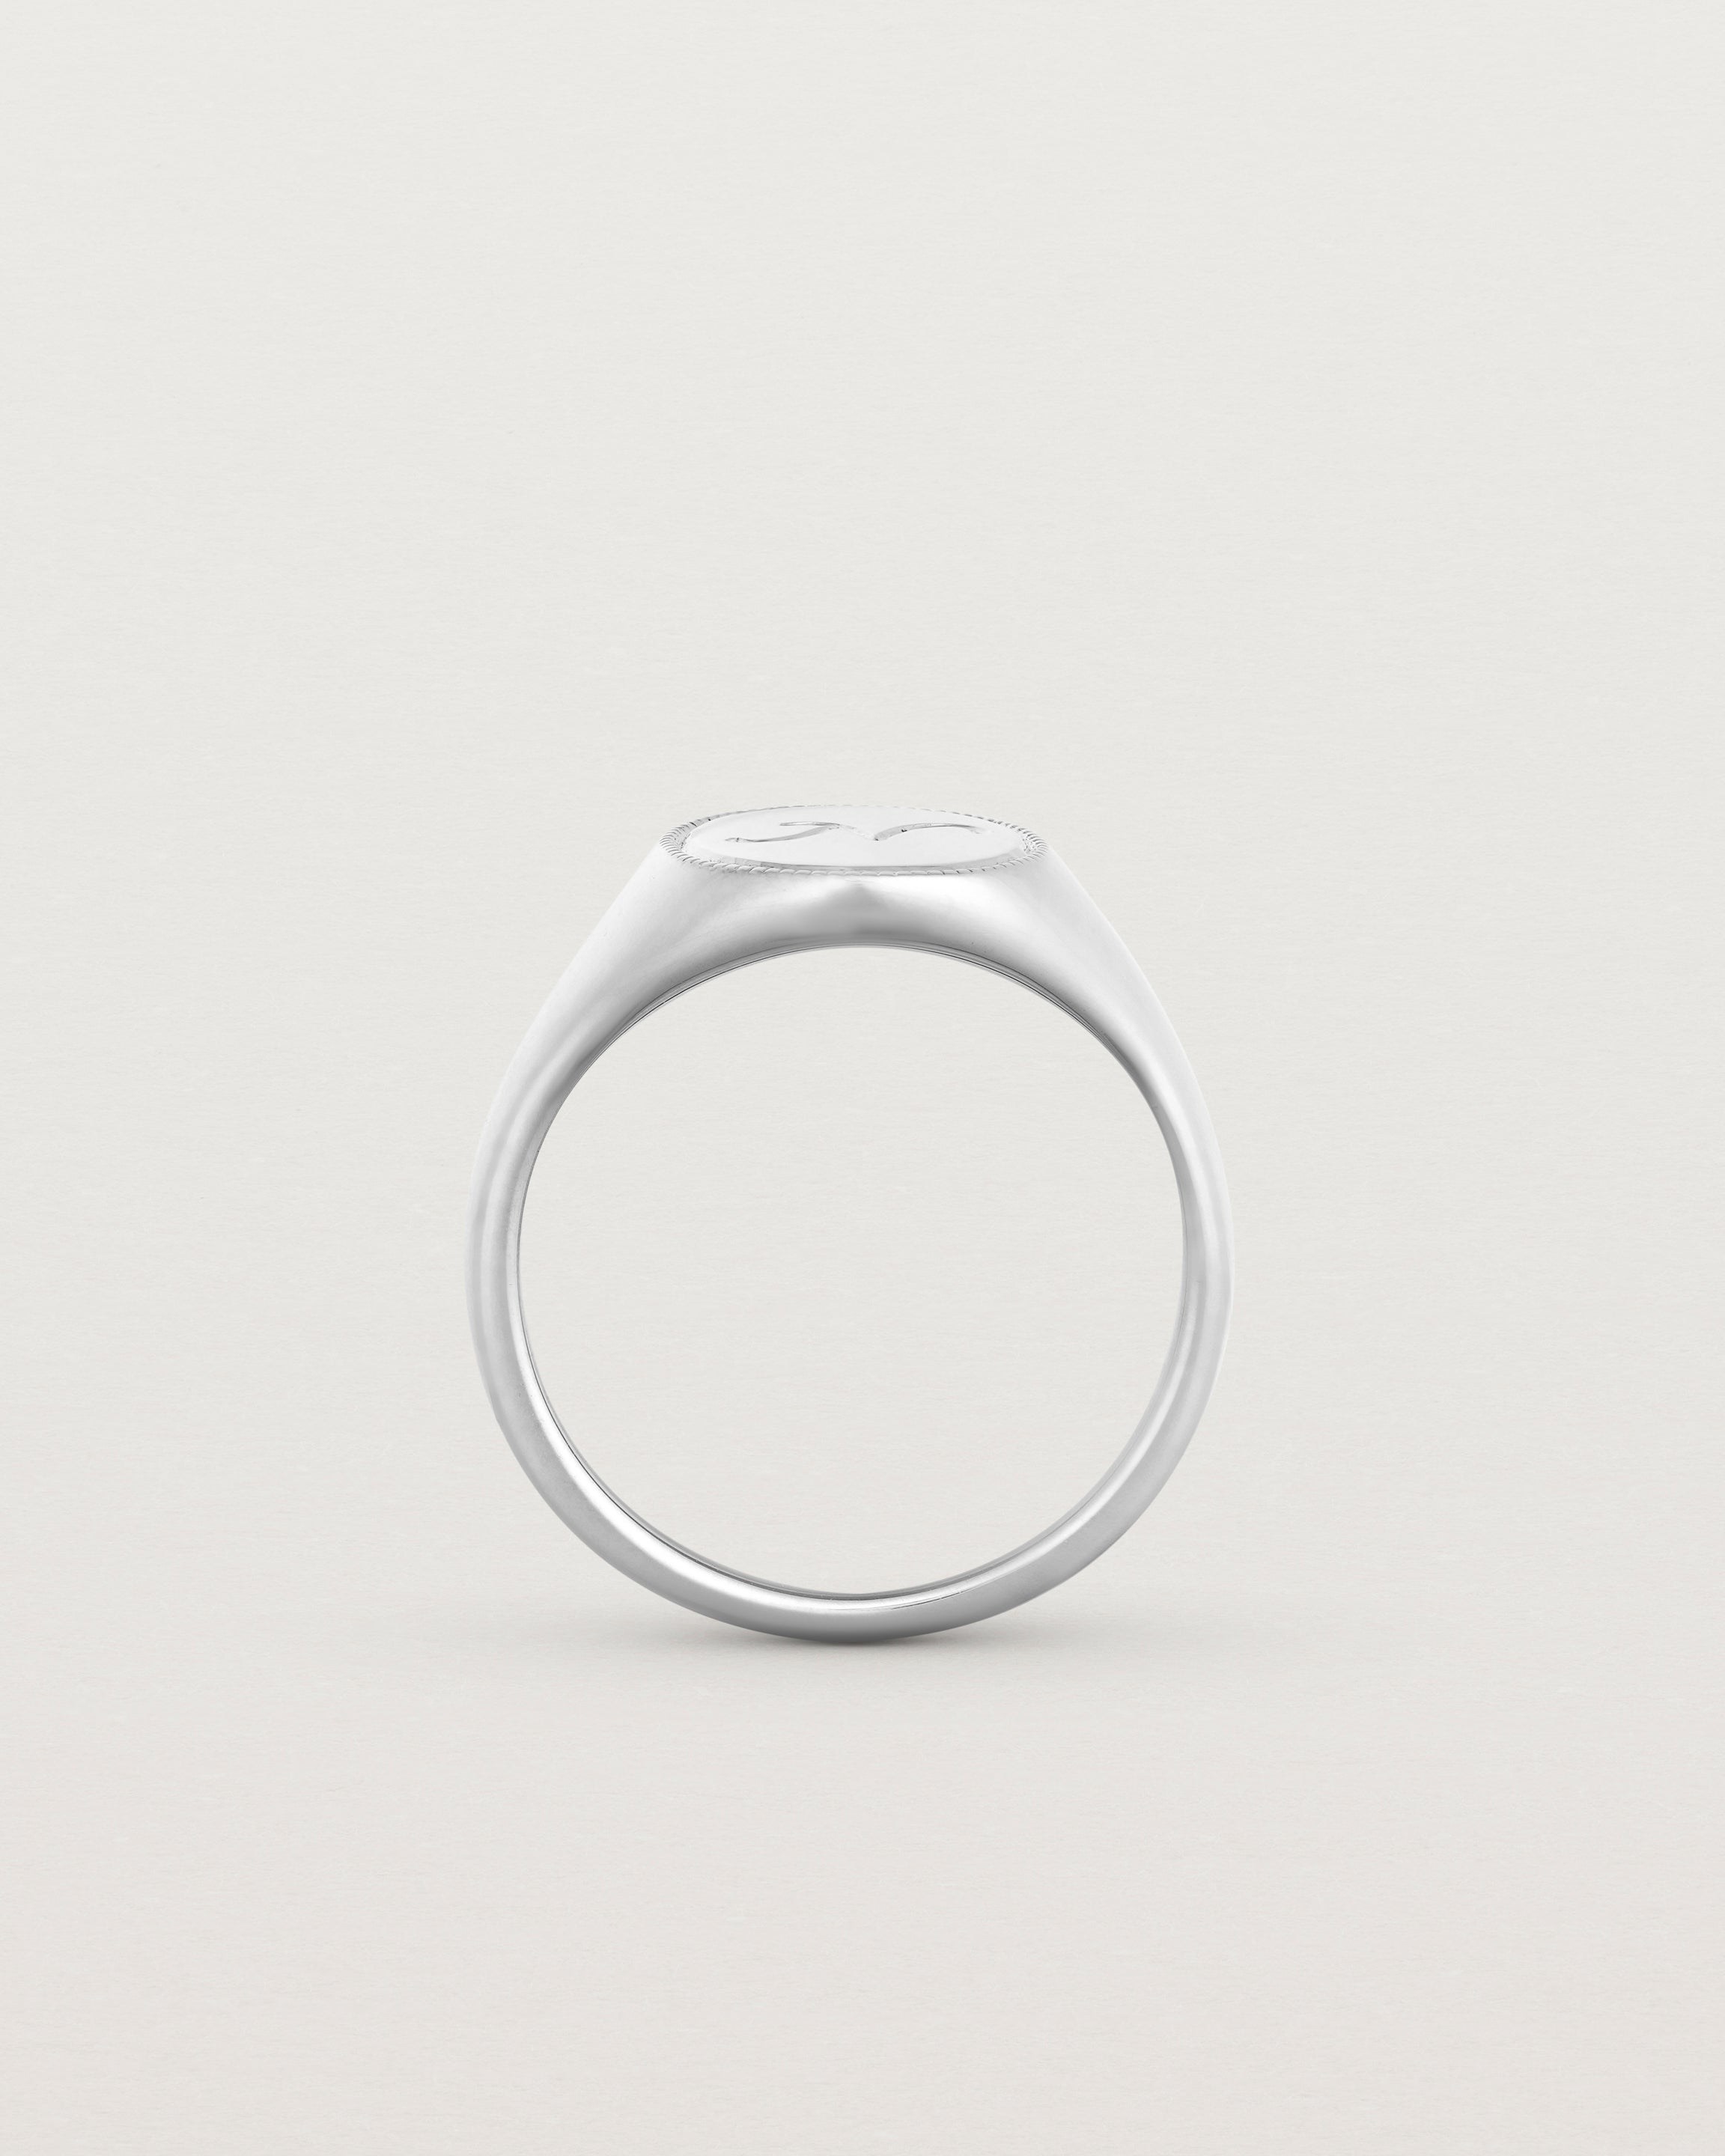 Standing view of the Arden Signet Ring | Millgrain in white gold.